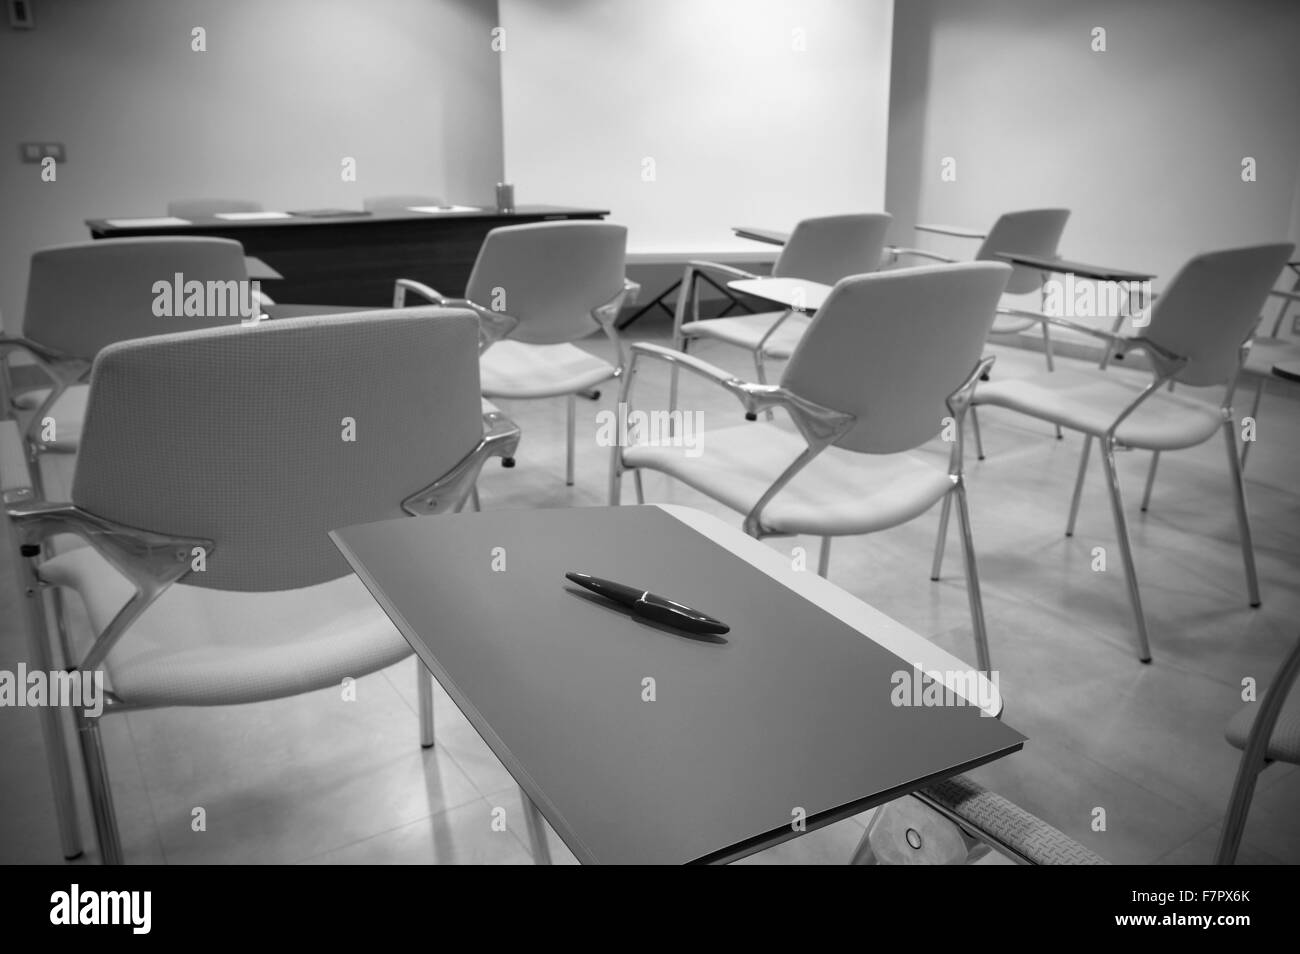 Classroom with School chairs and desk black and white Stock Photo